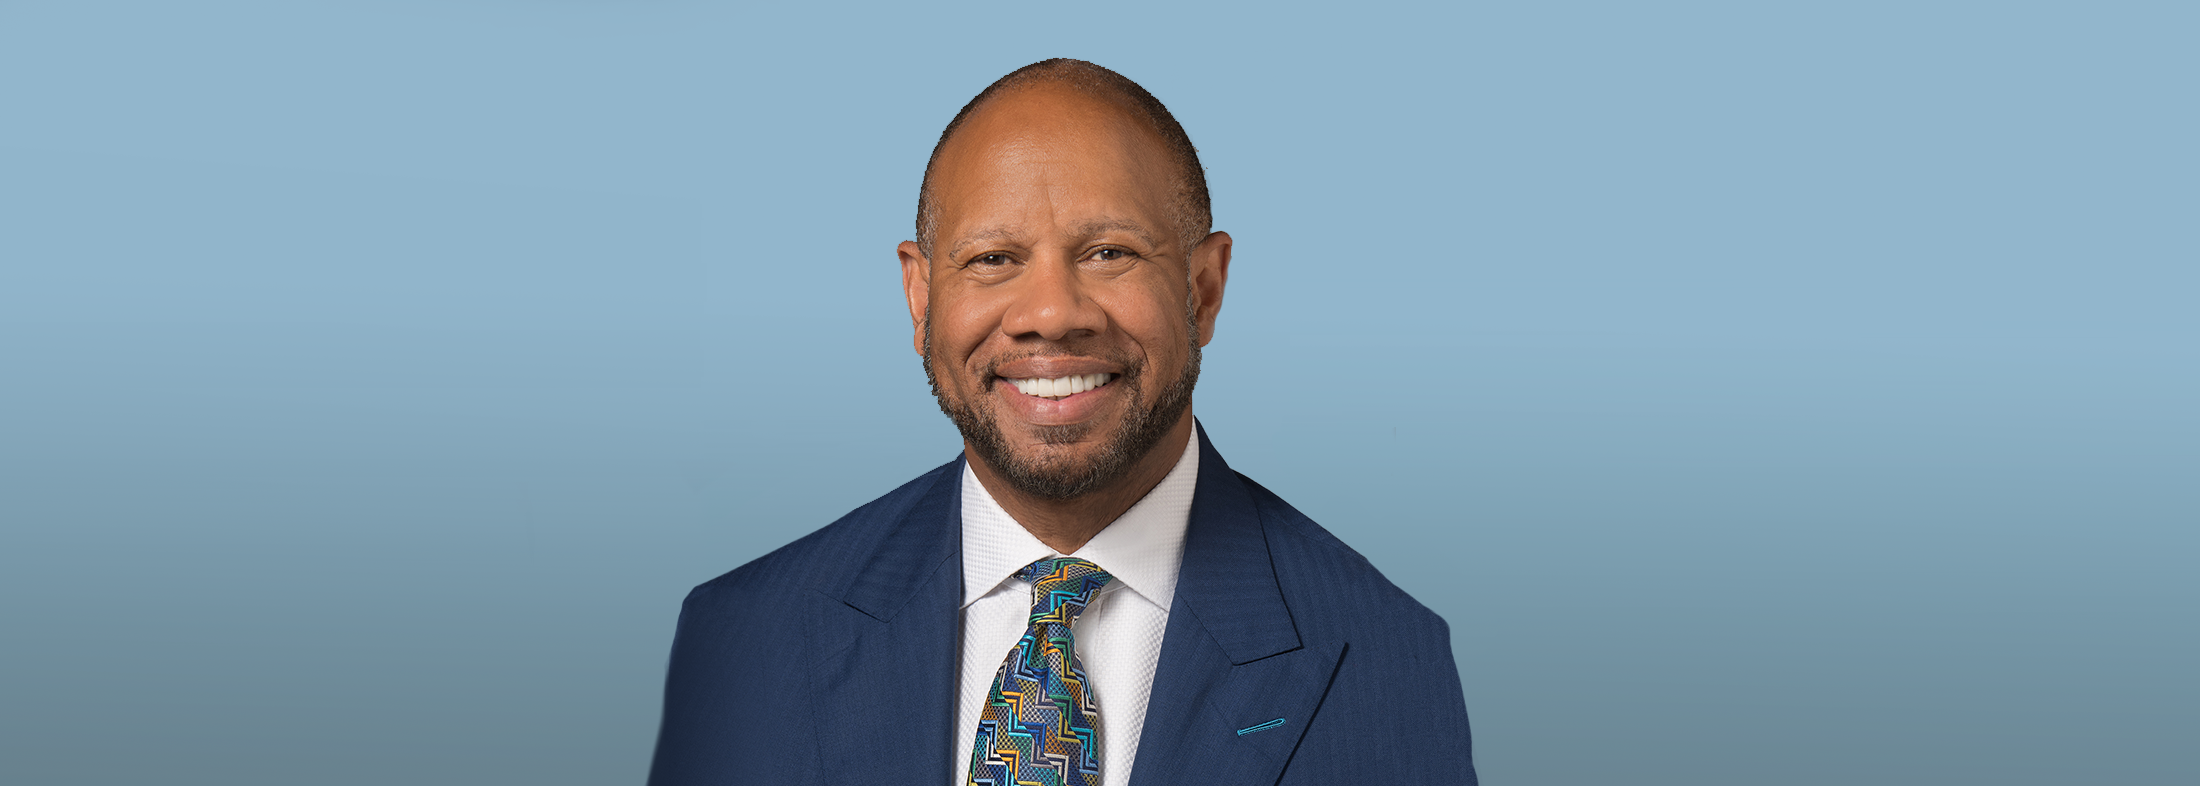 CommonSpirit Health announced today that Wright L. Lassiter III has started in his role as the organization’s next CEO, succeeding Lloyd H. Dean, who retired.